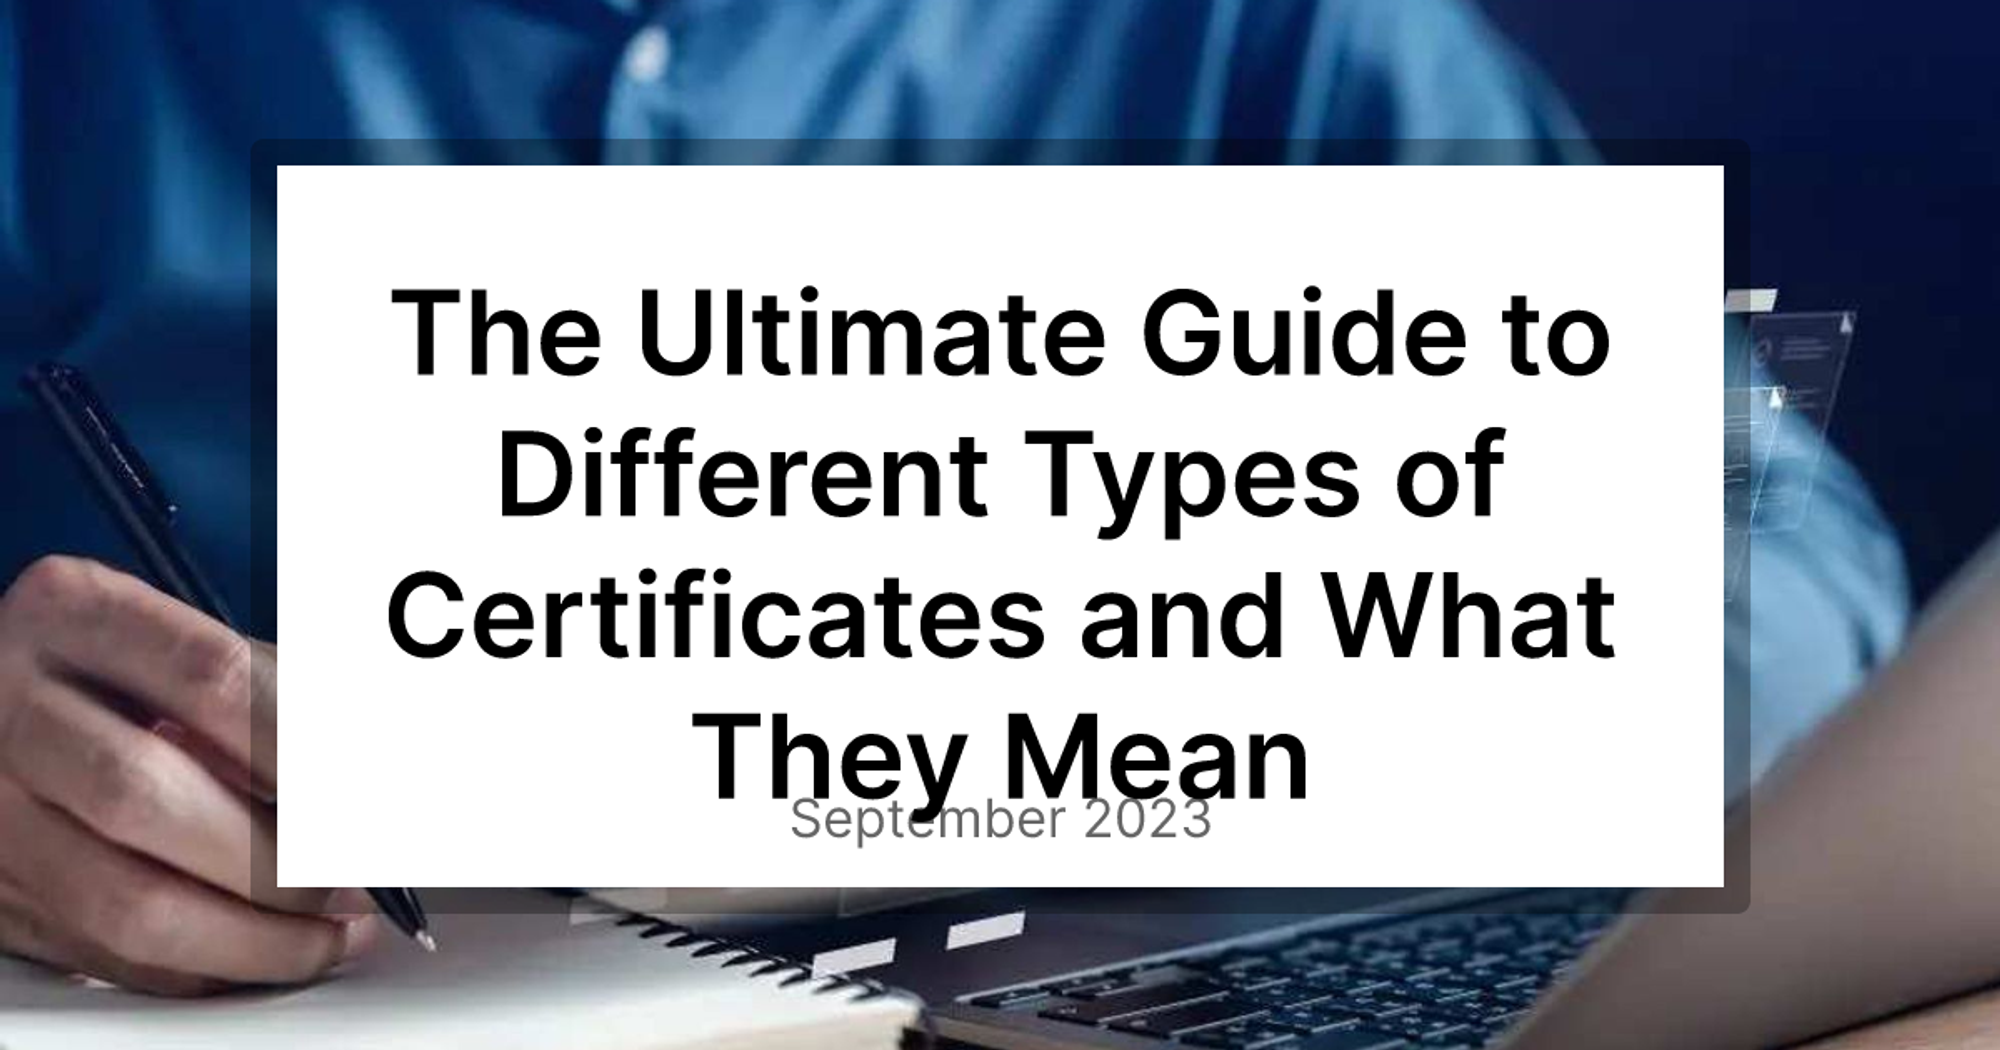 The Ultimate Guide to Different Types of Certificates and What They Mean